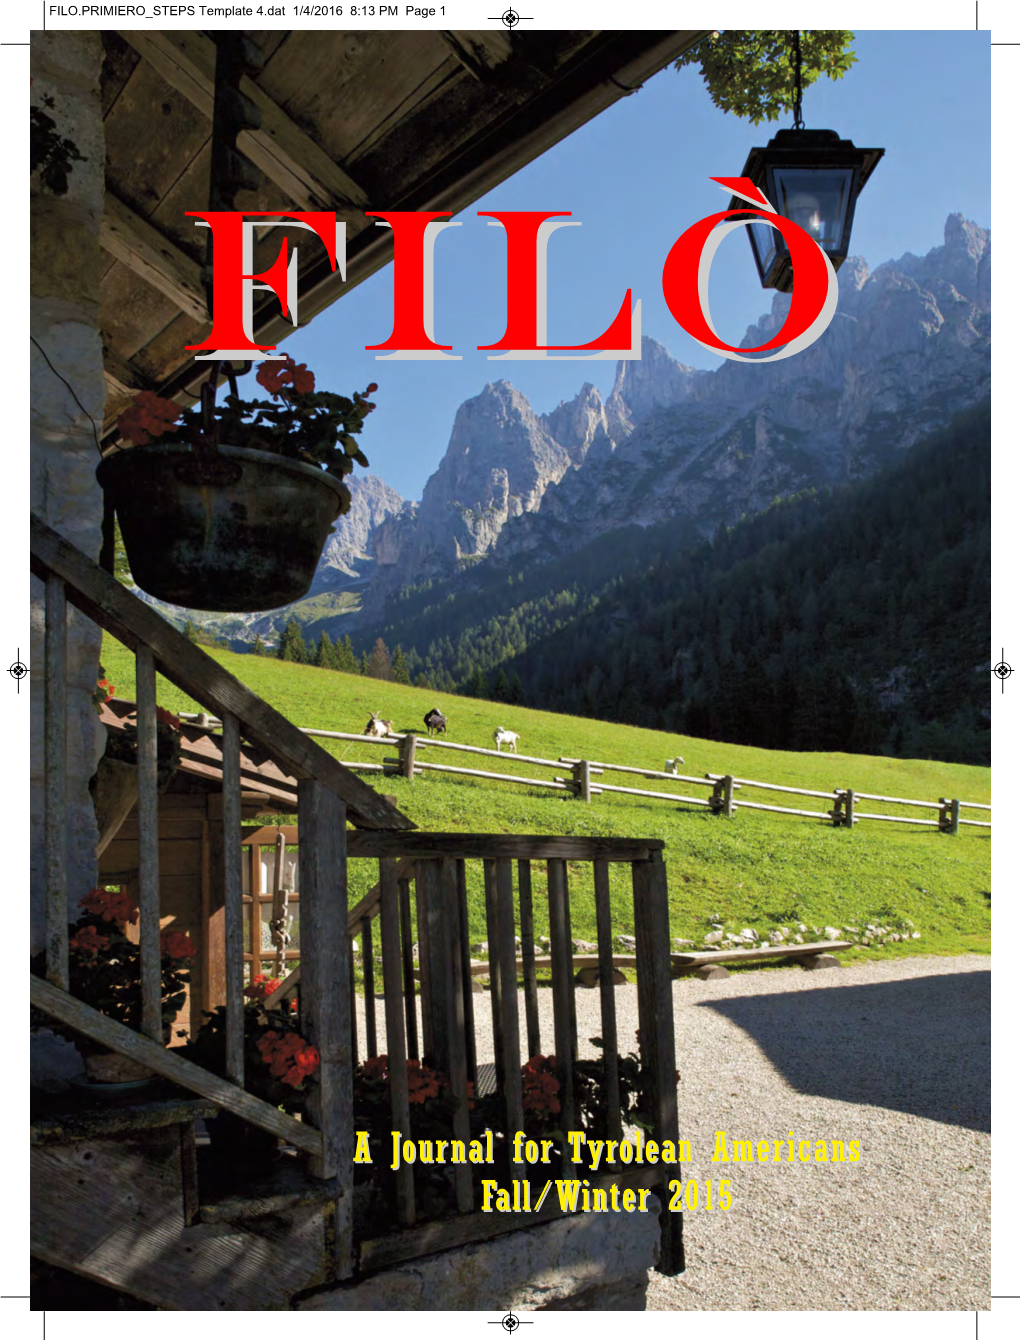 A Journal for Tyrolean Americans Fall/Winter 2015